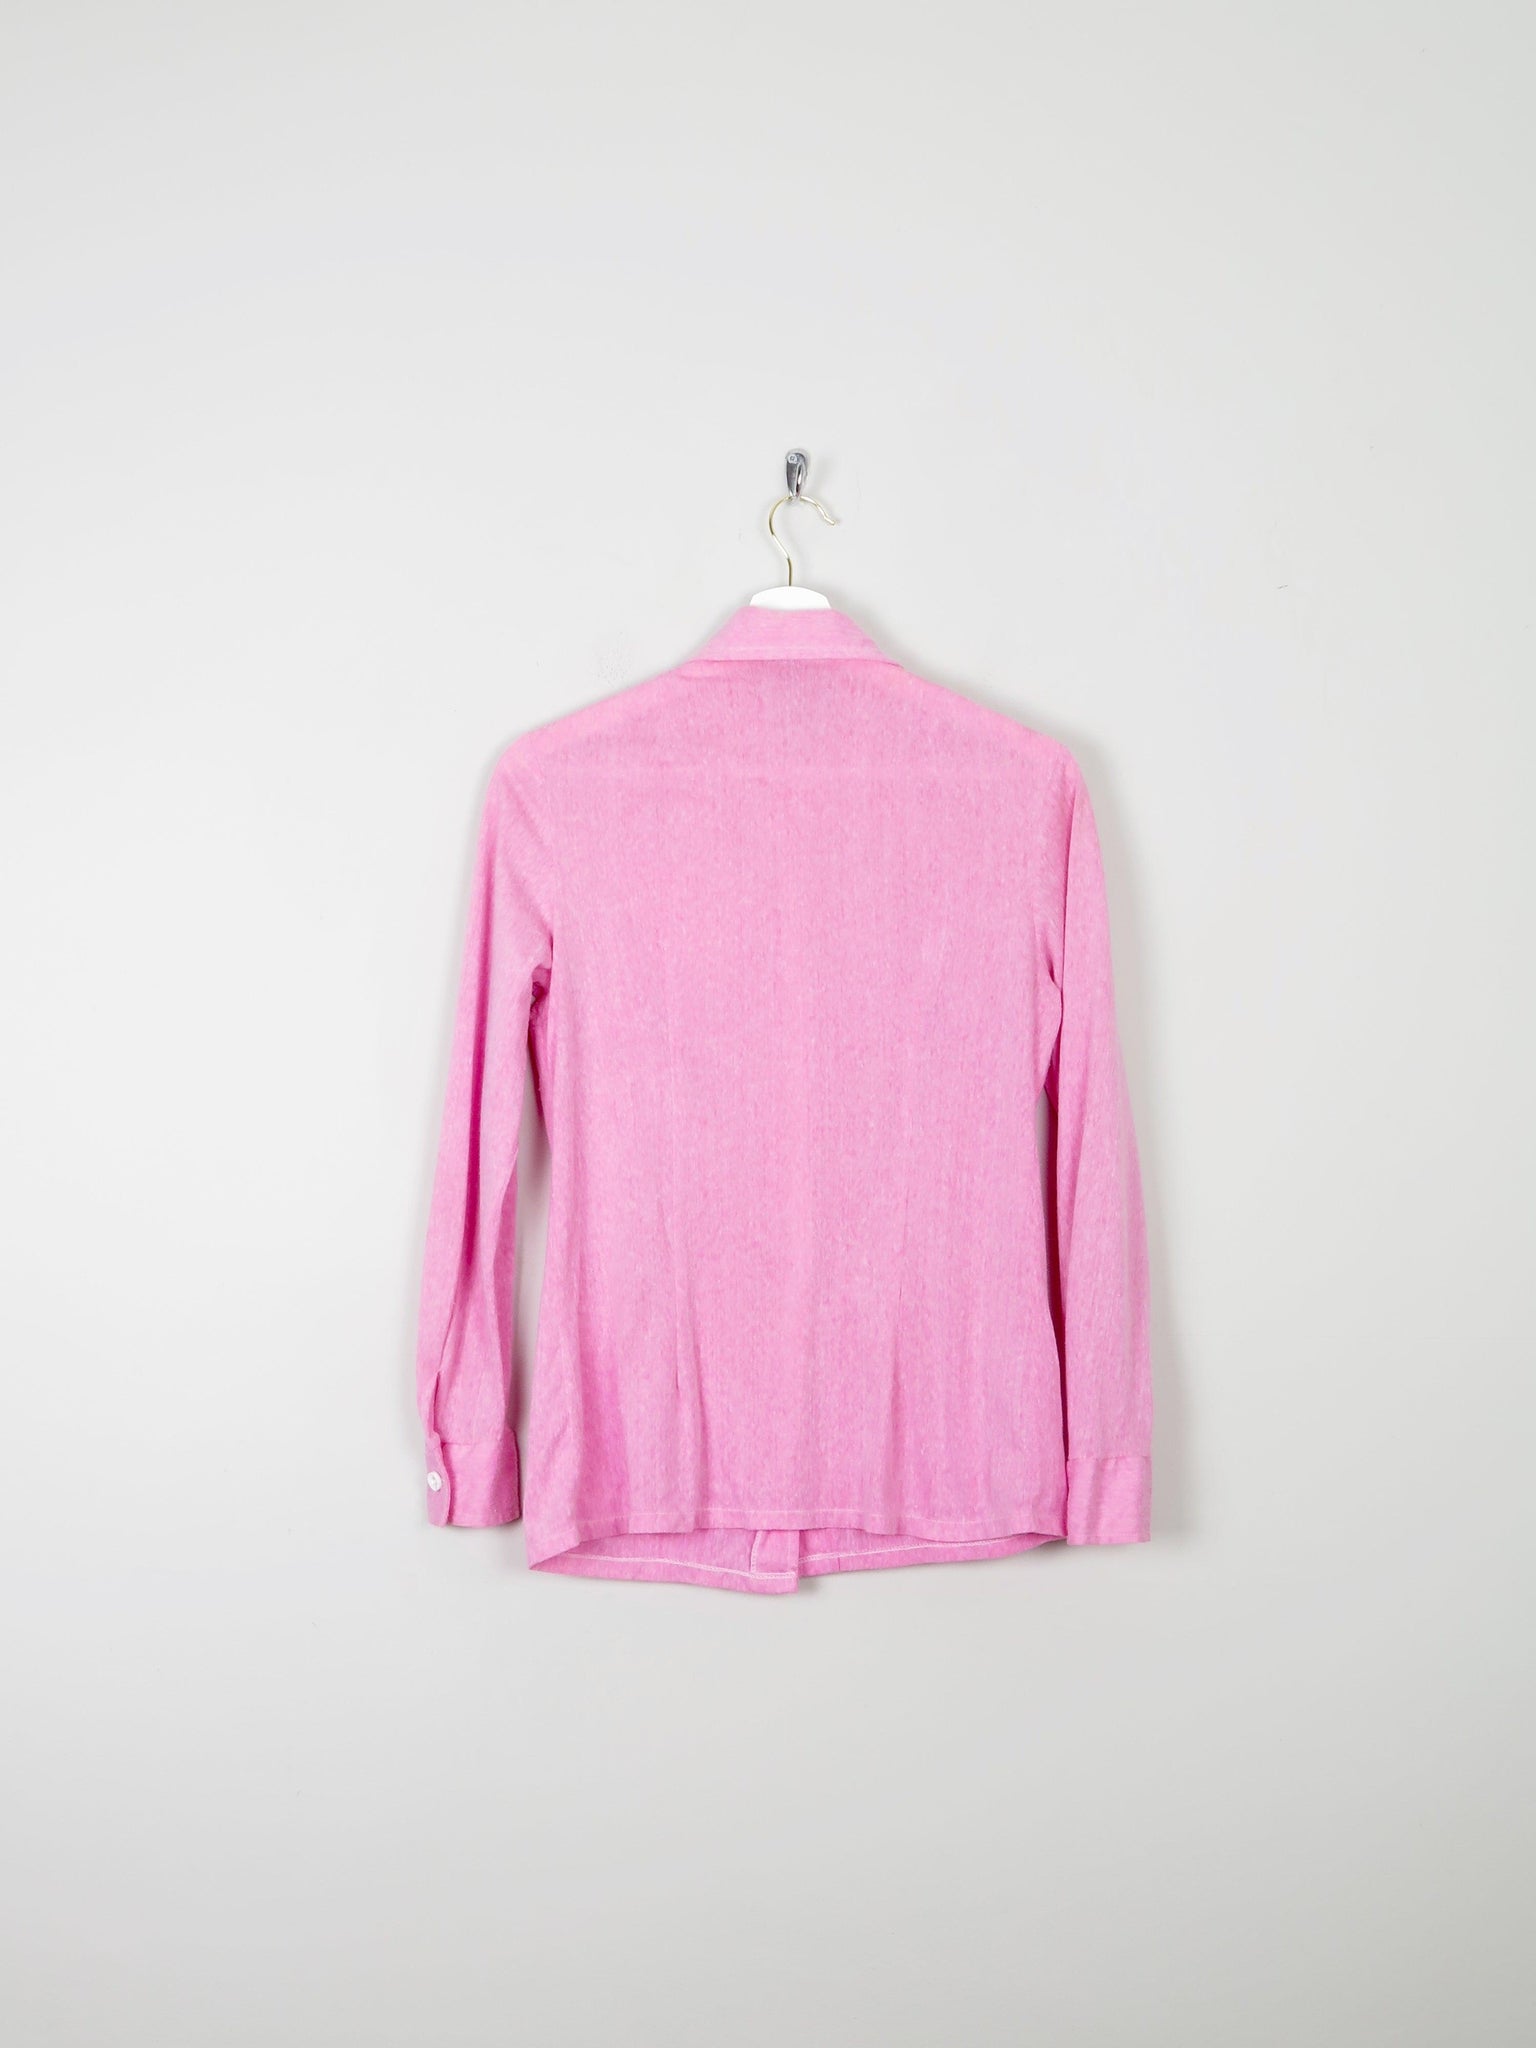 Women's 1970s Candy Pink Blouse With A Collar S - The Harlequin